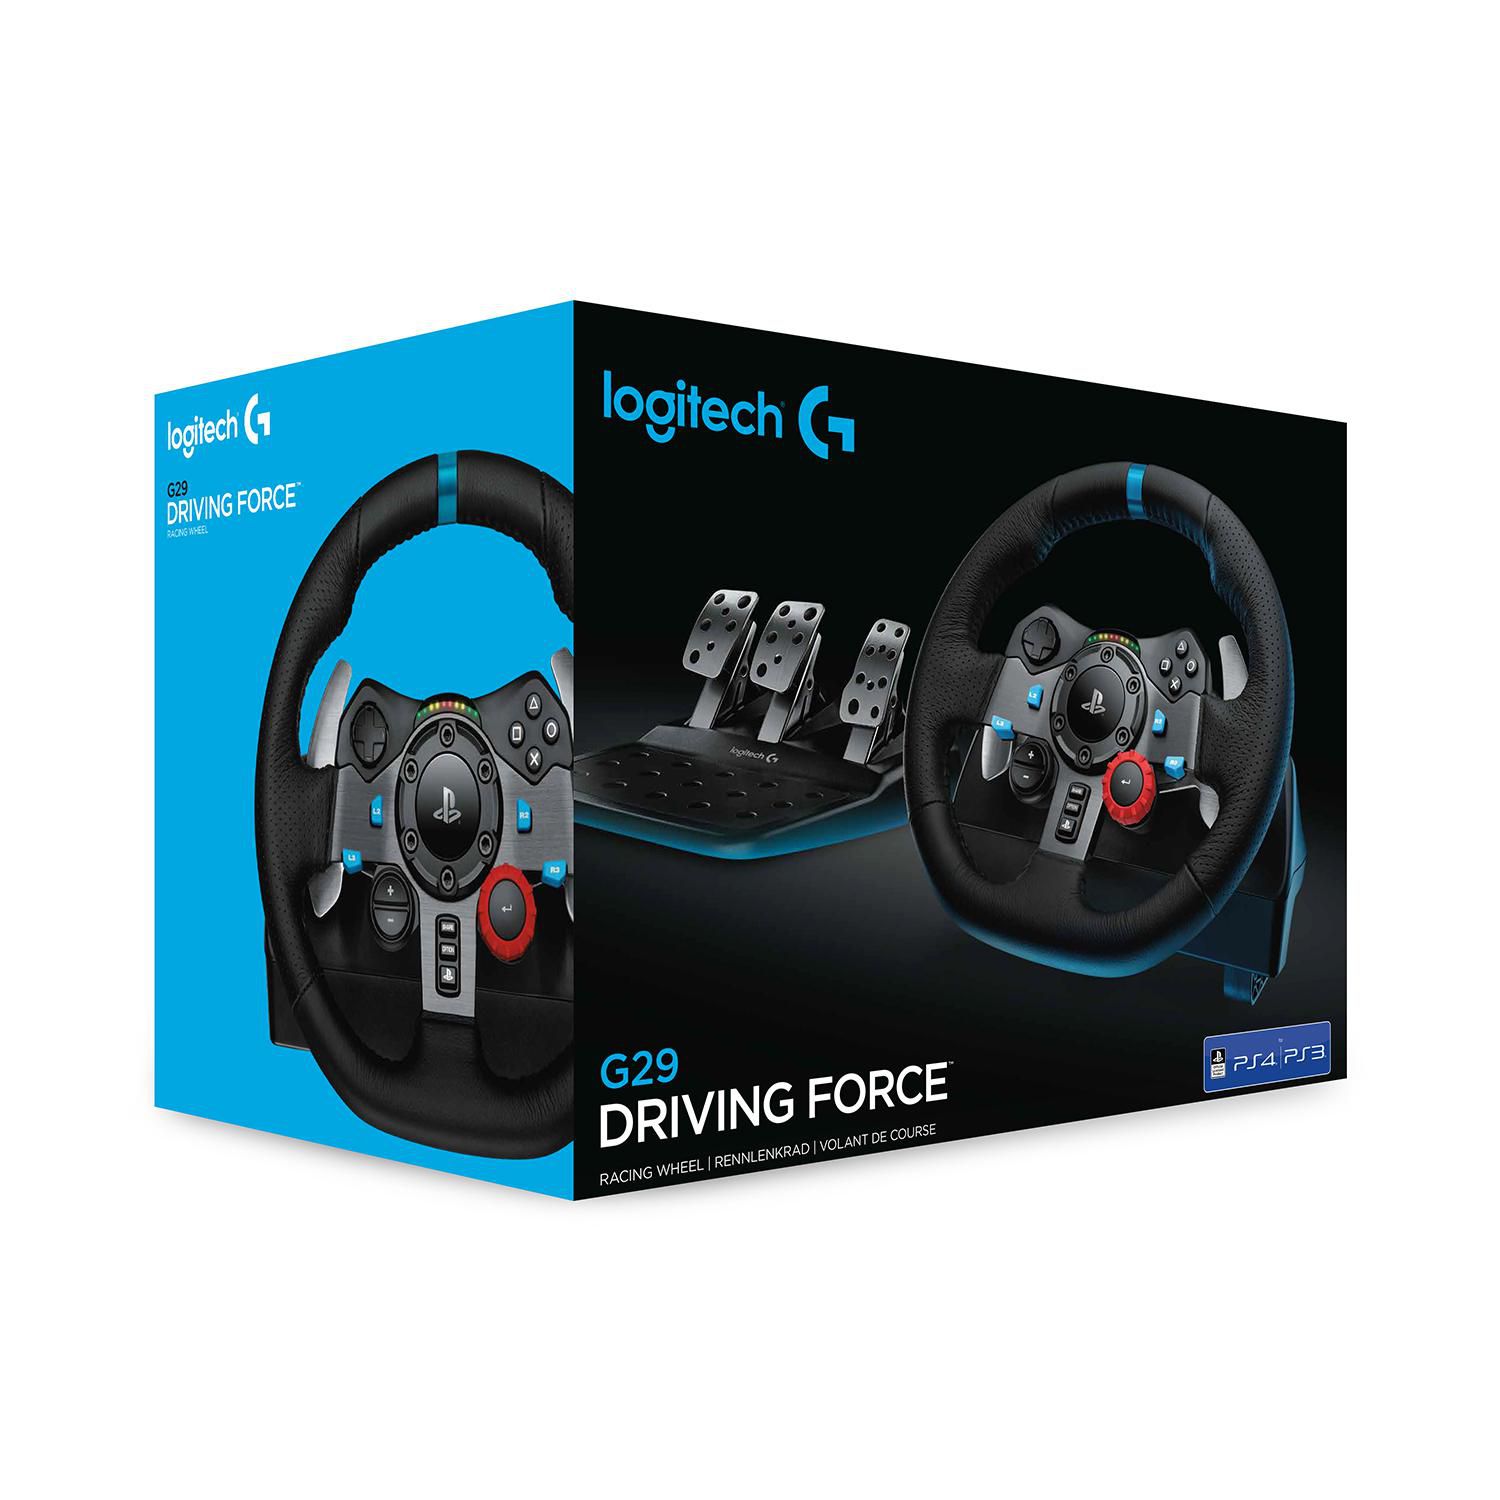 Logitech G29 Driving Force PlayStation 4 and PlayStation 3 Racing Wheel